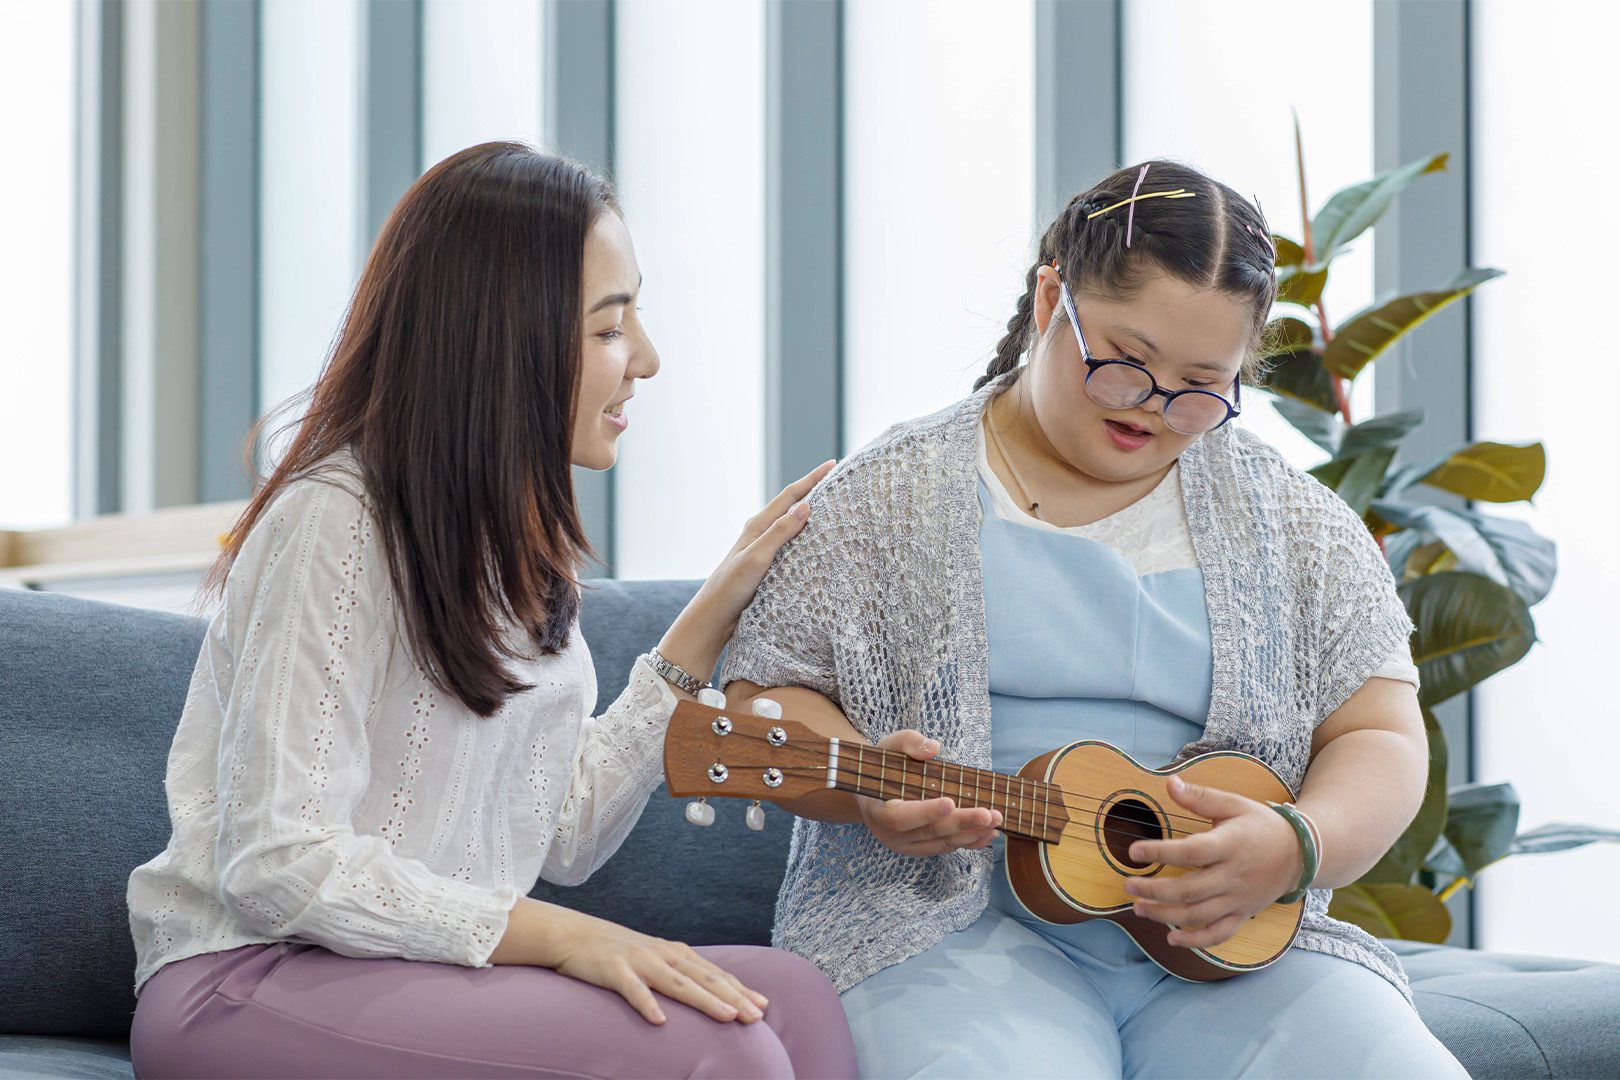 Asian woman teaching a young girl with down syndrome to play Ukulele musical instrument